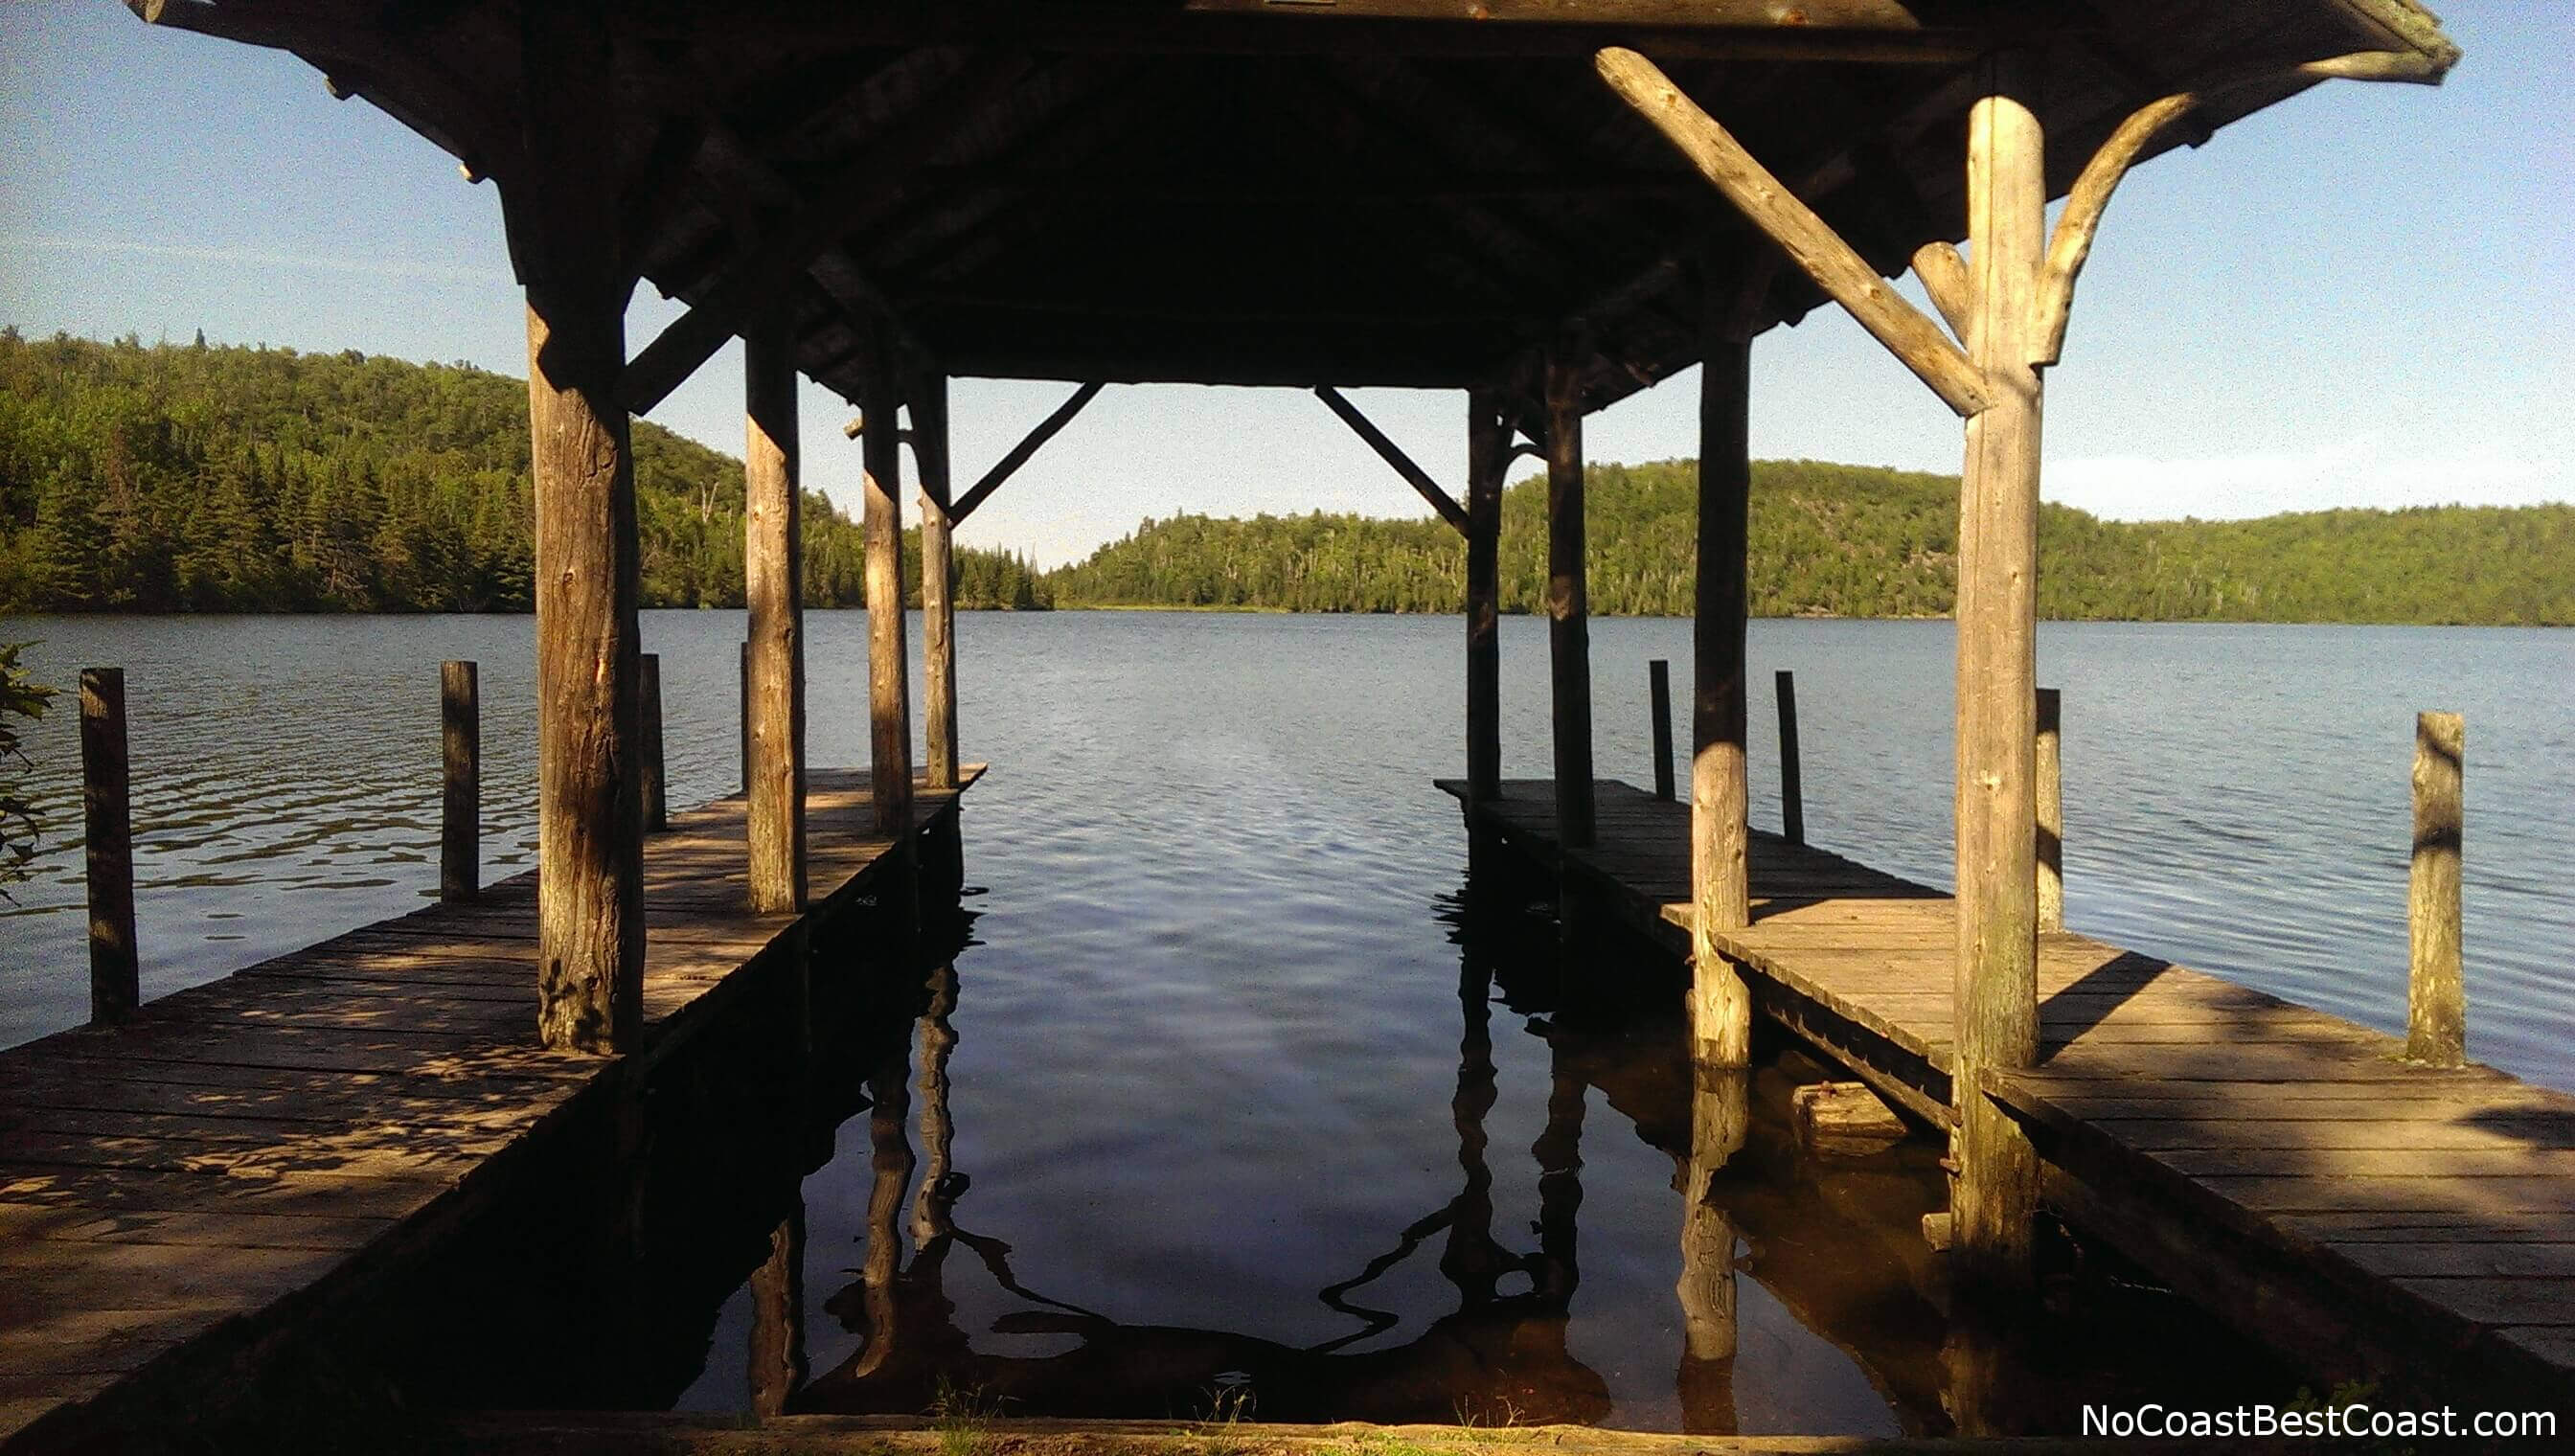 View of Mic Mac Lake from the dock